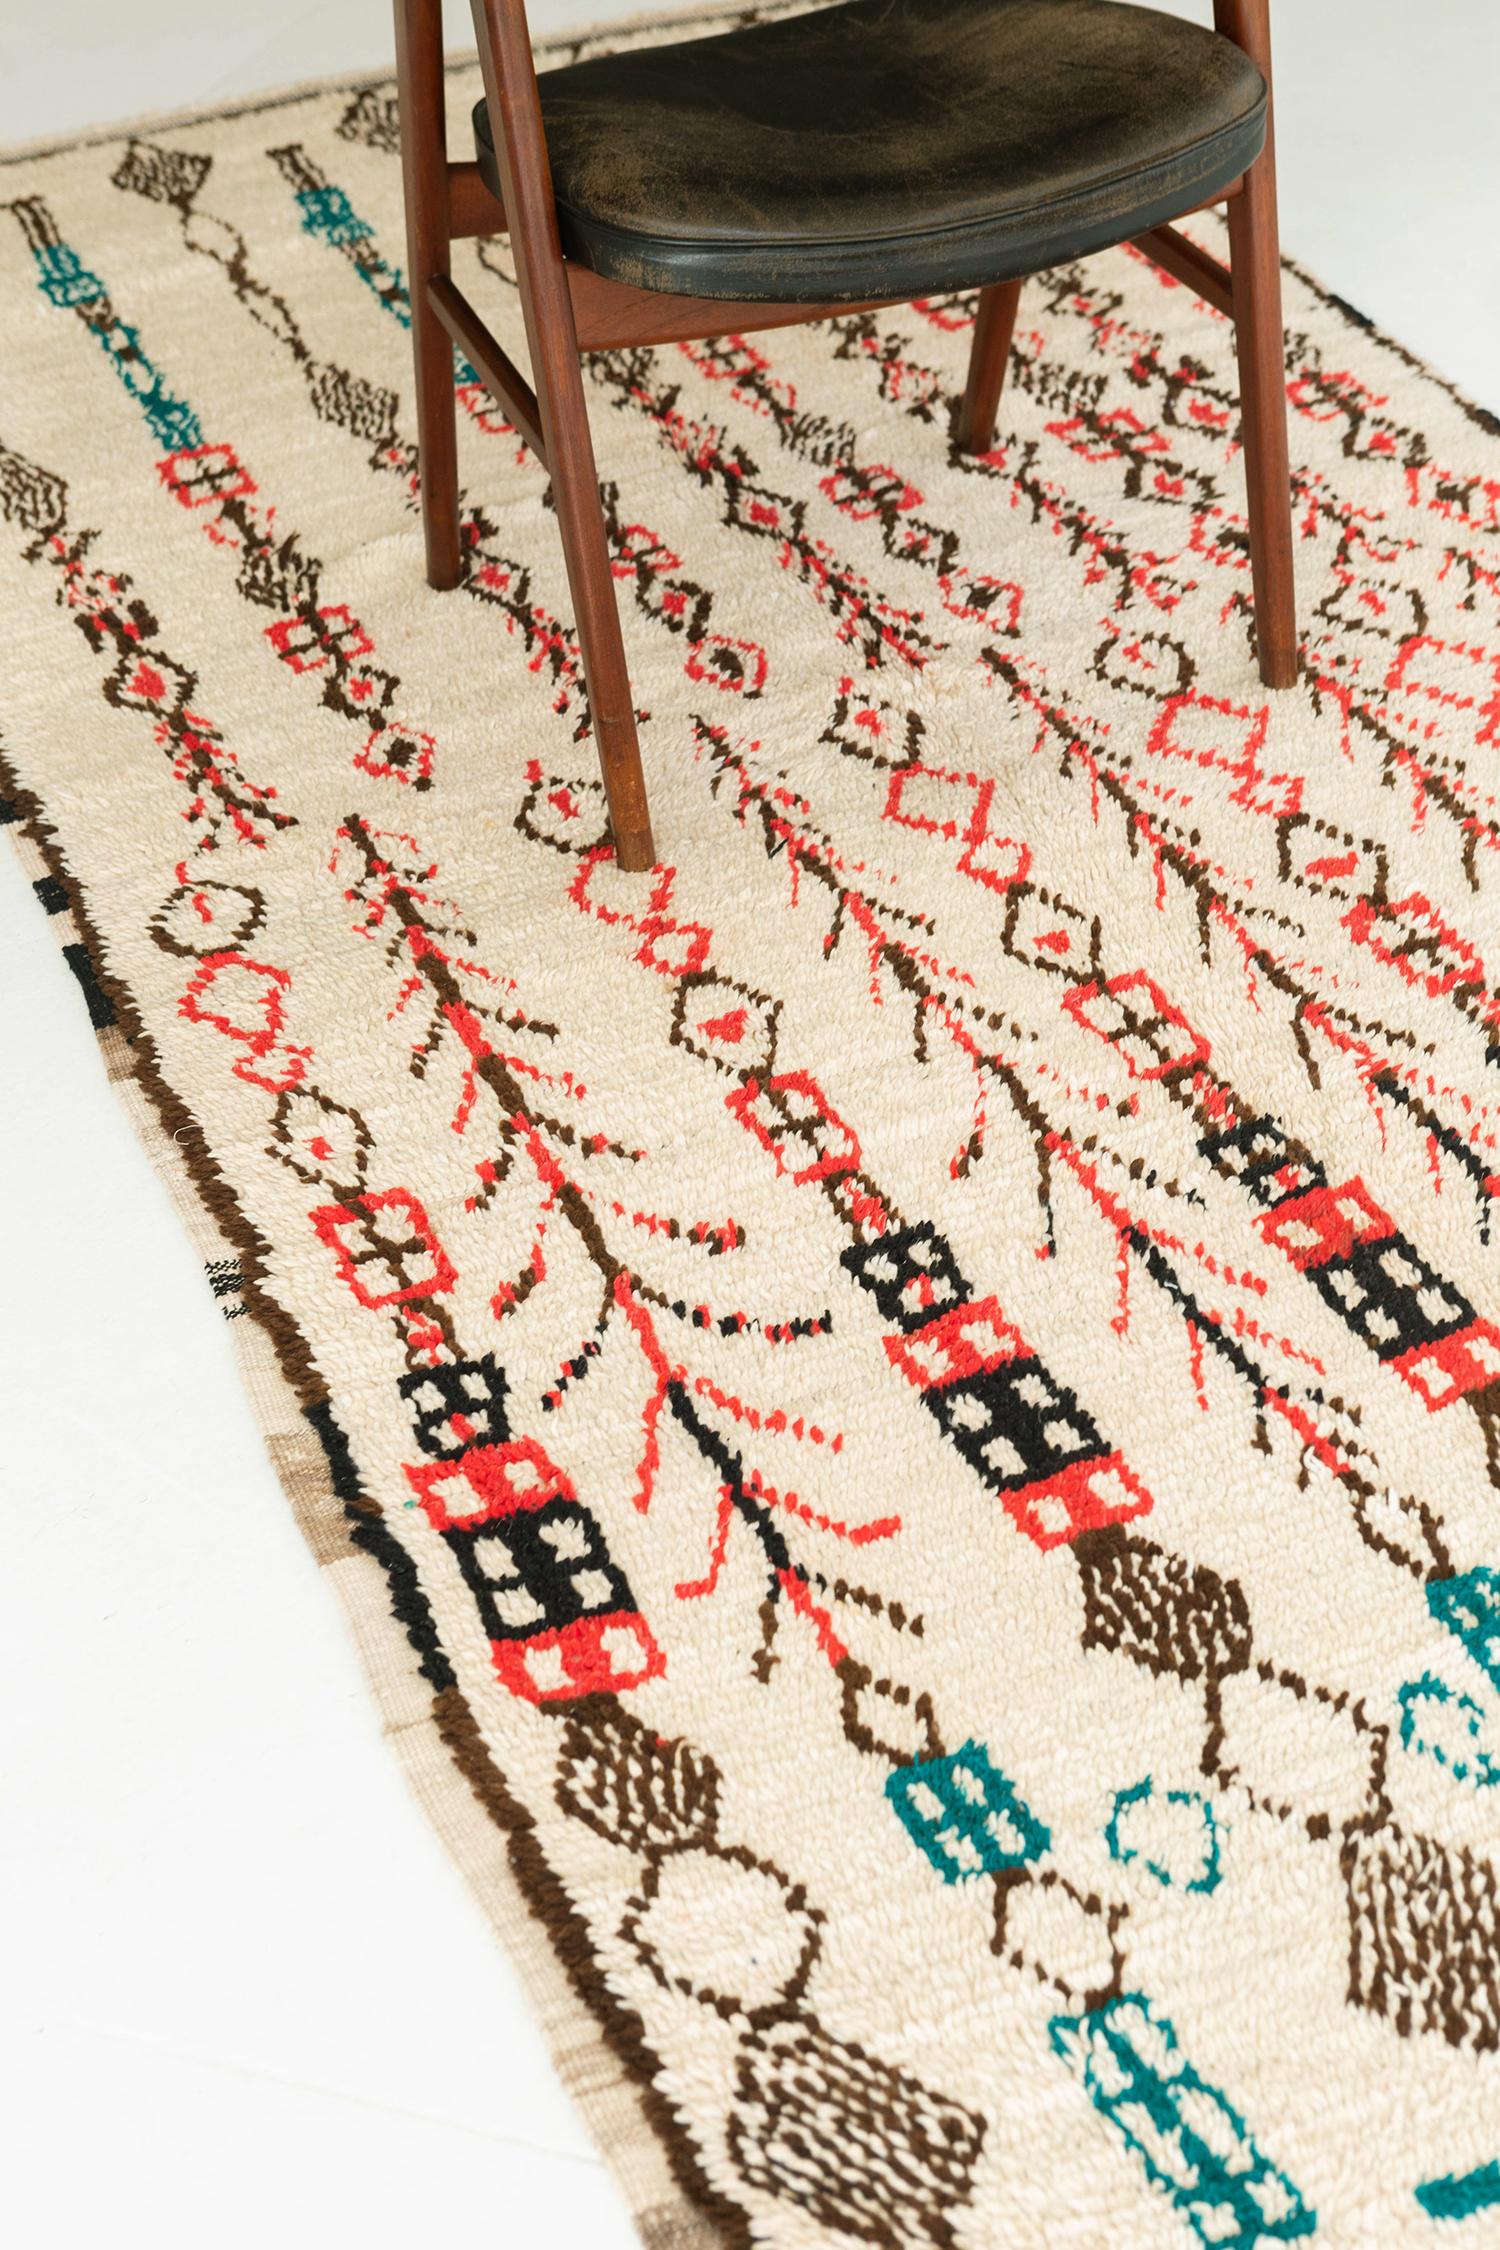 An exquisite Vintage Moroccan Azilal Tribe Berber rug with meticulously embellished ornate elements featuring the soothing collaborative shades of brown, salmon, blue green and ivory. It magnificently displays a tribal style composed of variegated